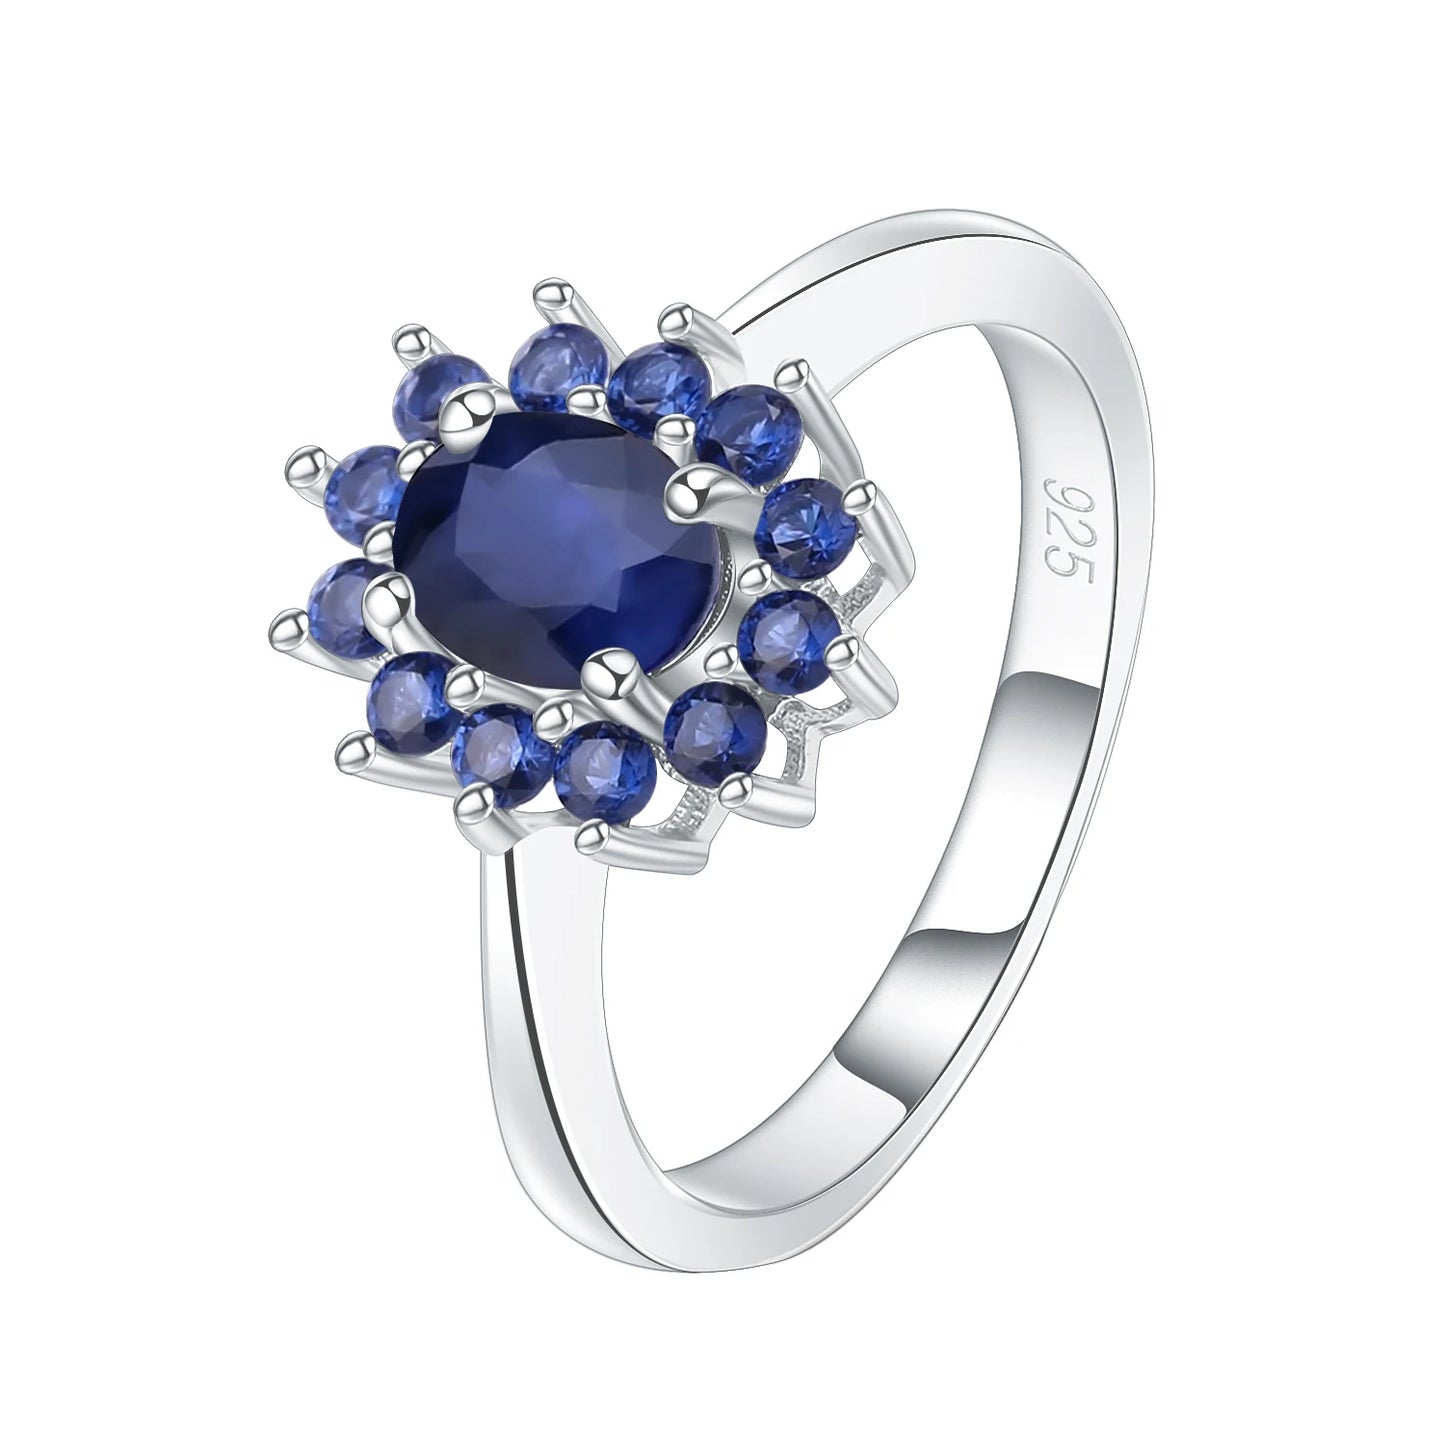 GEM'S BALLET 1.89Ct Natural Blue Sapphire 925 Silver Ring 585 14K 10K 18K Gold Gemstones Vintage Rings For Women Fine Jewelry 925 Sterling Silver Sapphire